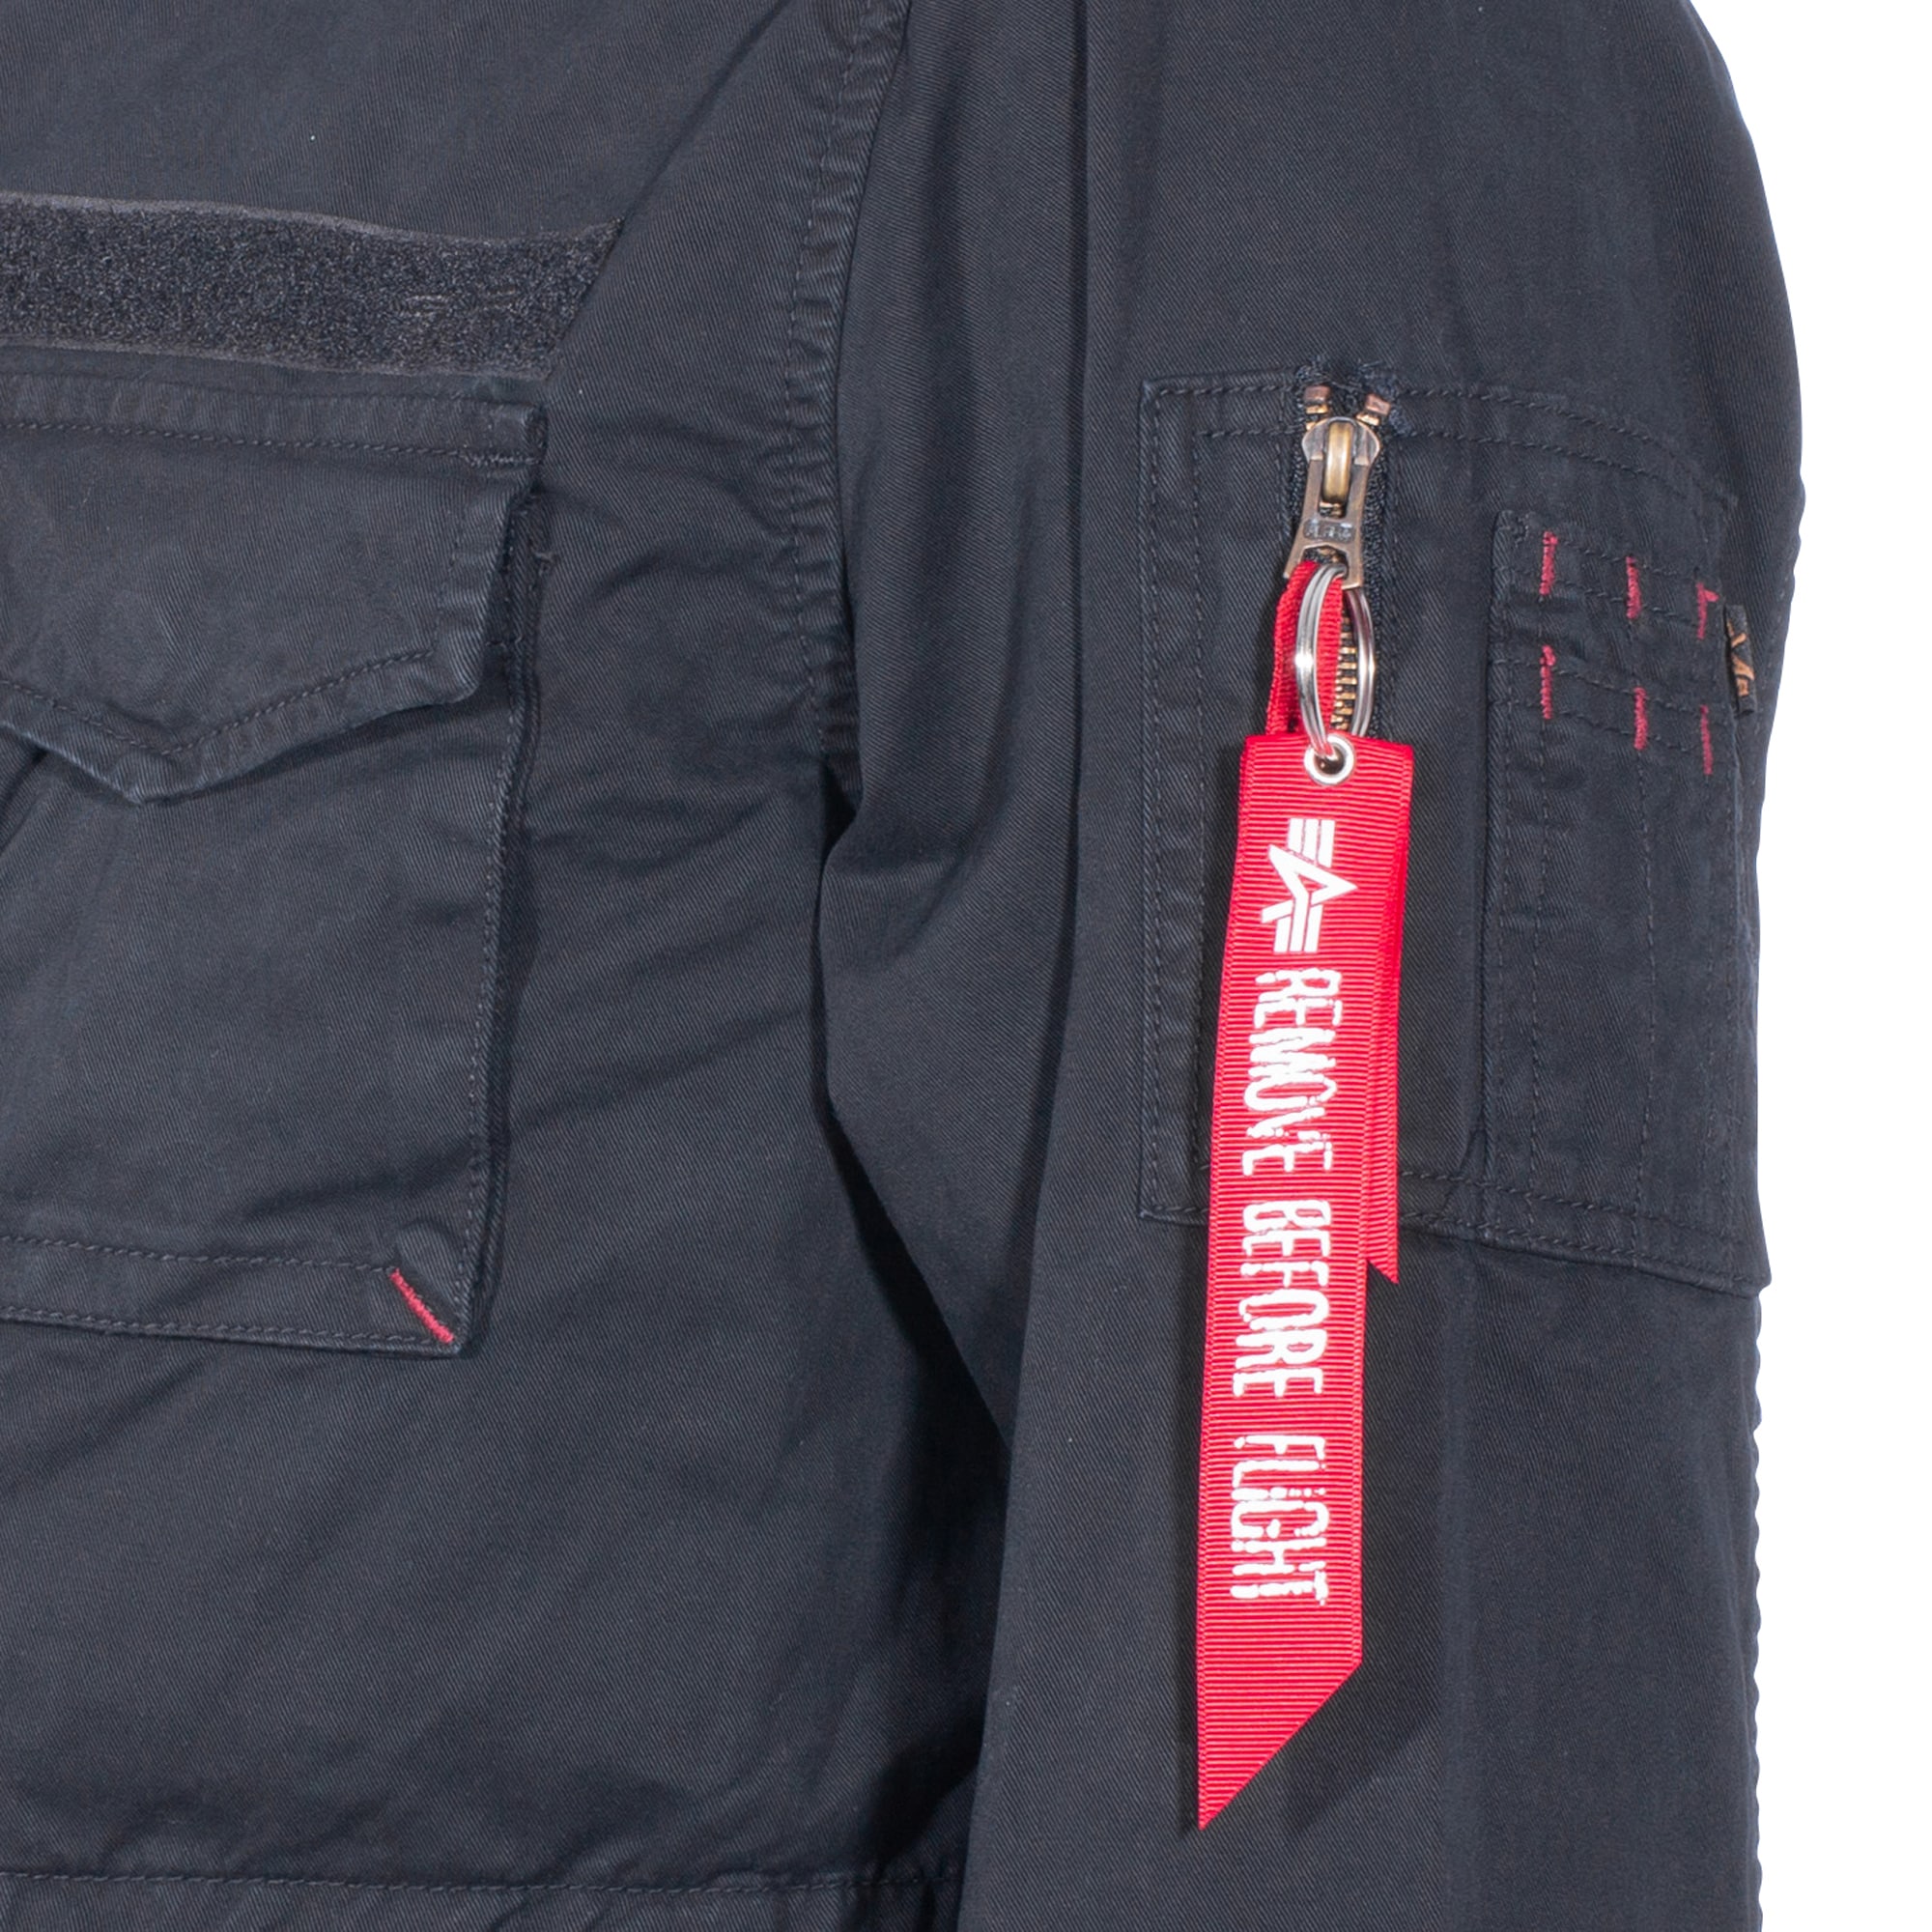 Alpha A Huntington the Jacket by Purchase Industries black Field